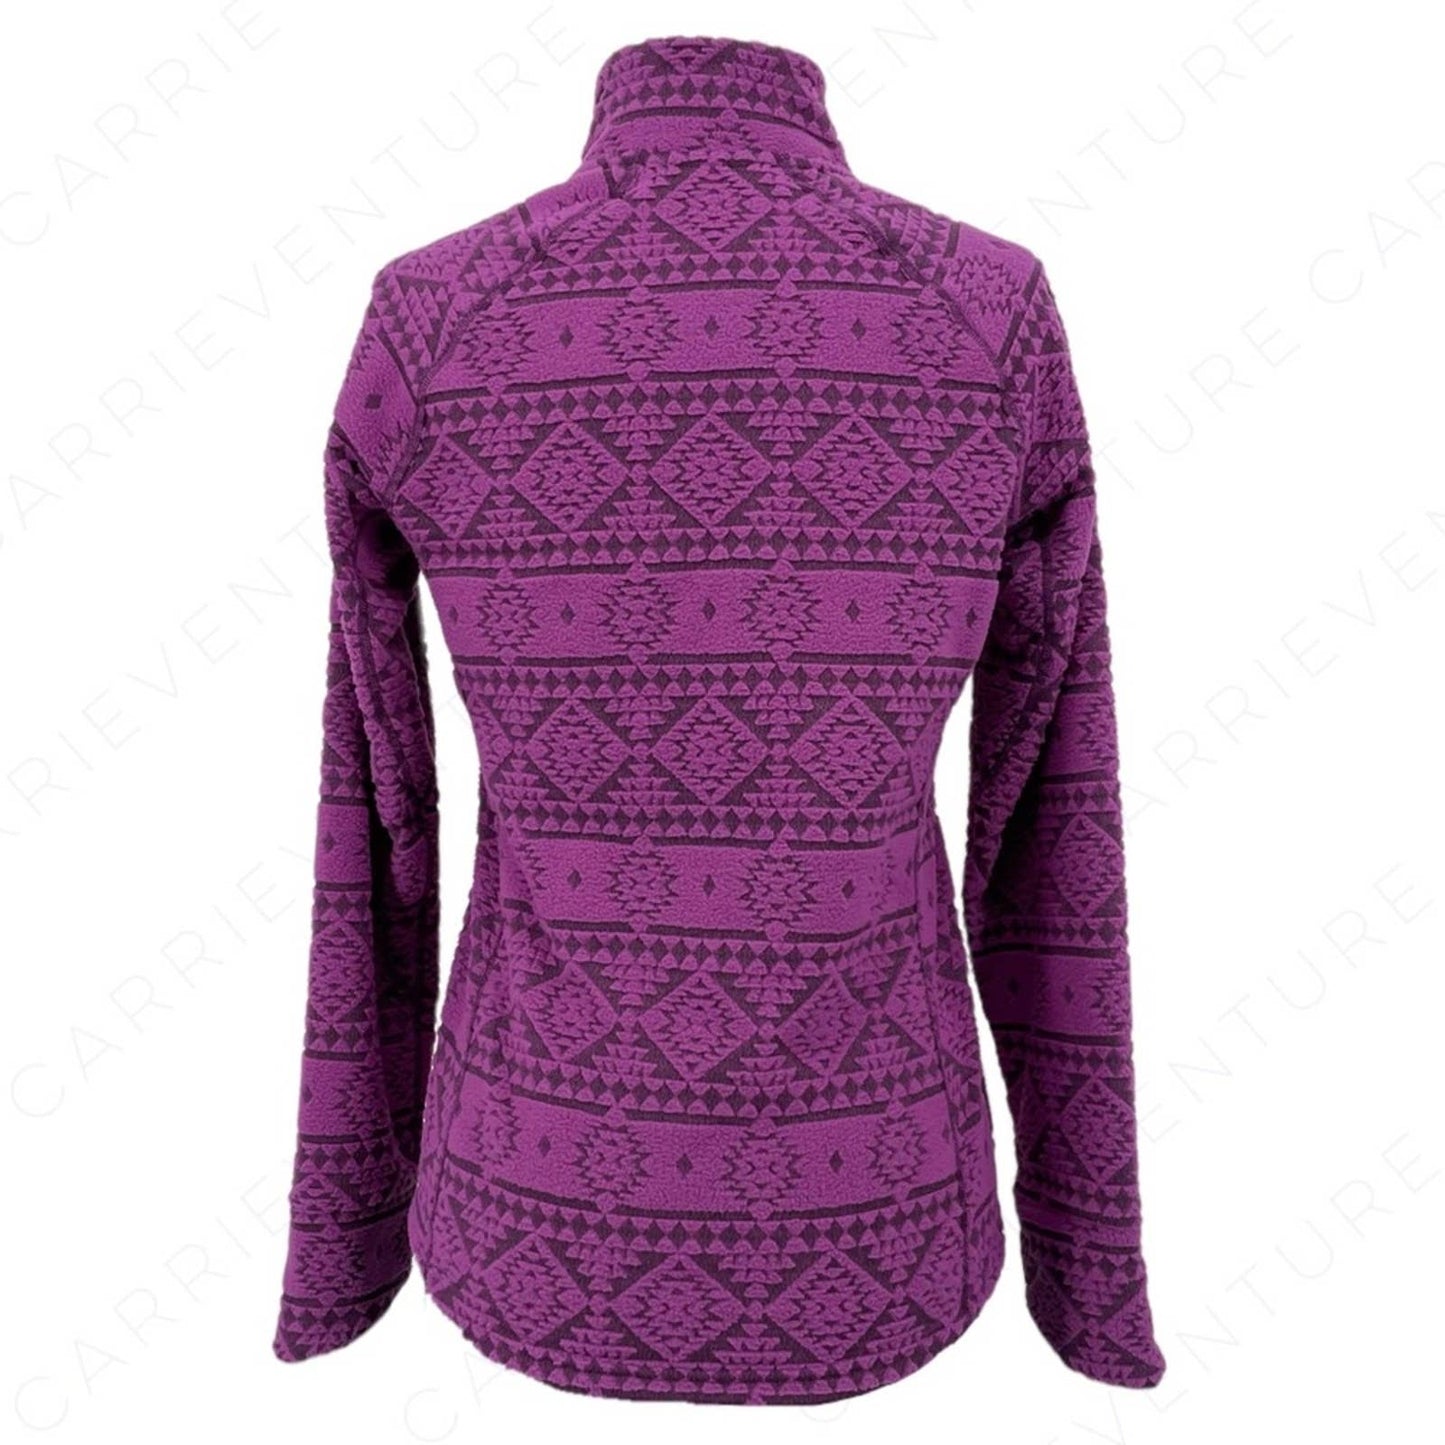 EMS Eastern Mountain Sports Bright Purple Pullover Fleece Jacket Top Snap Neck Size S